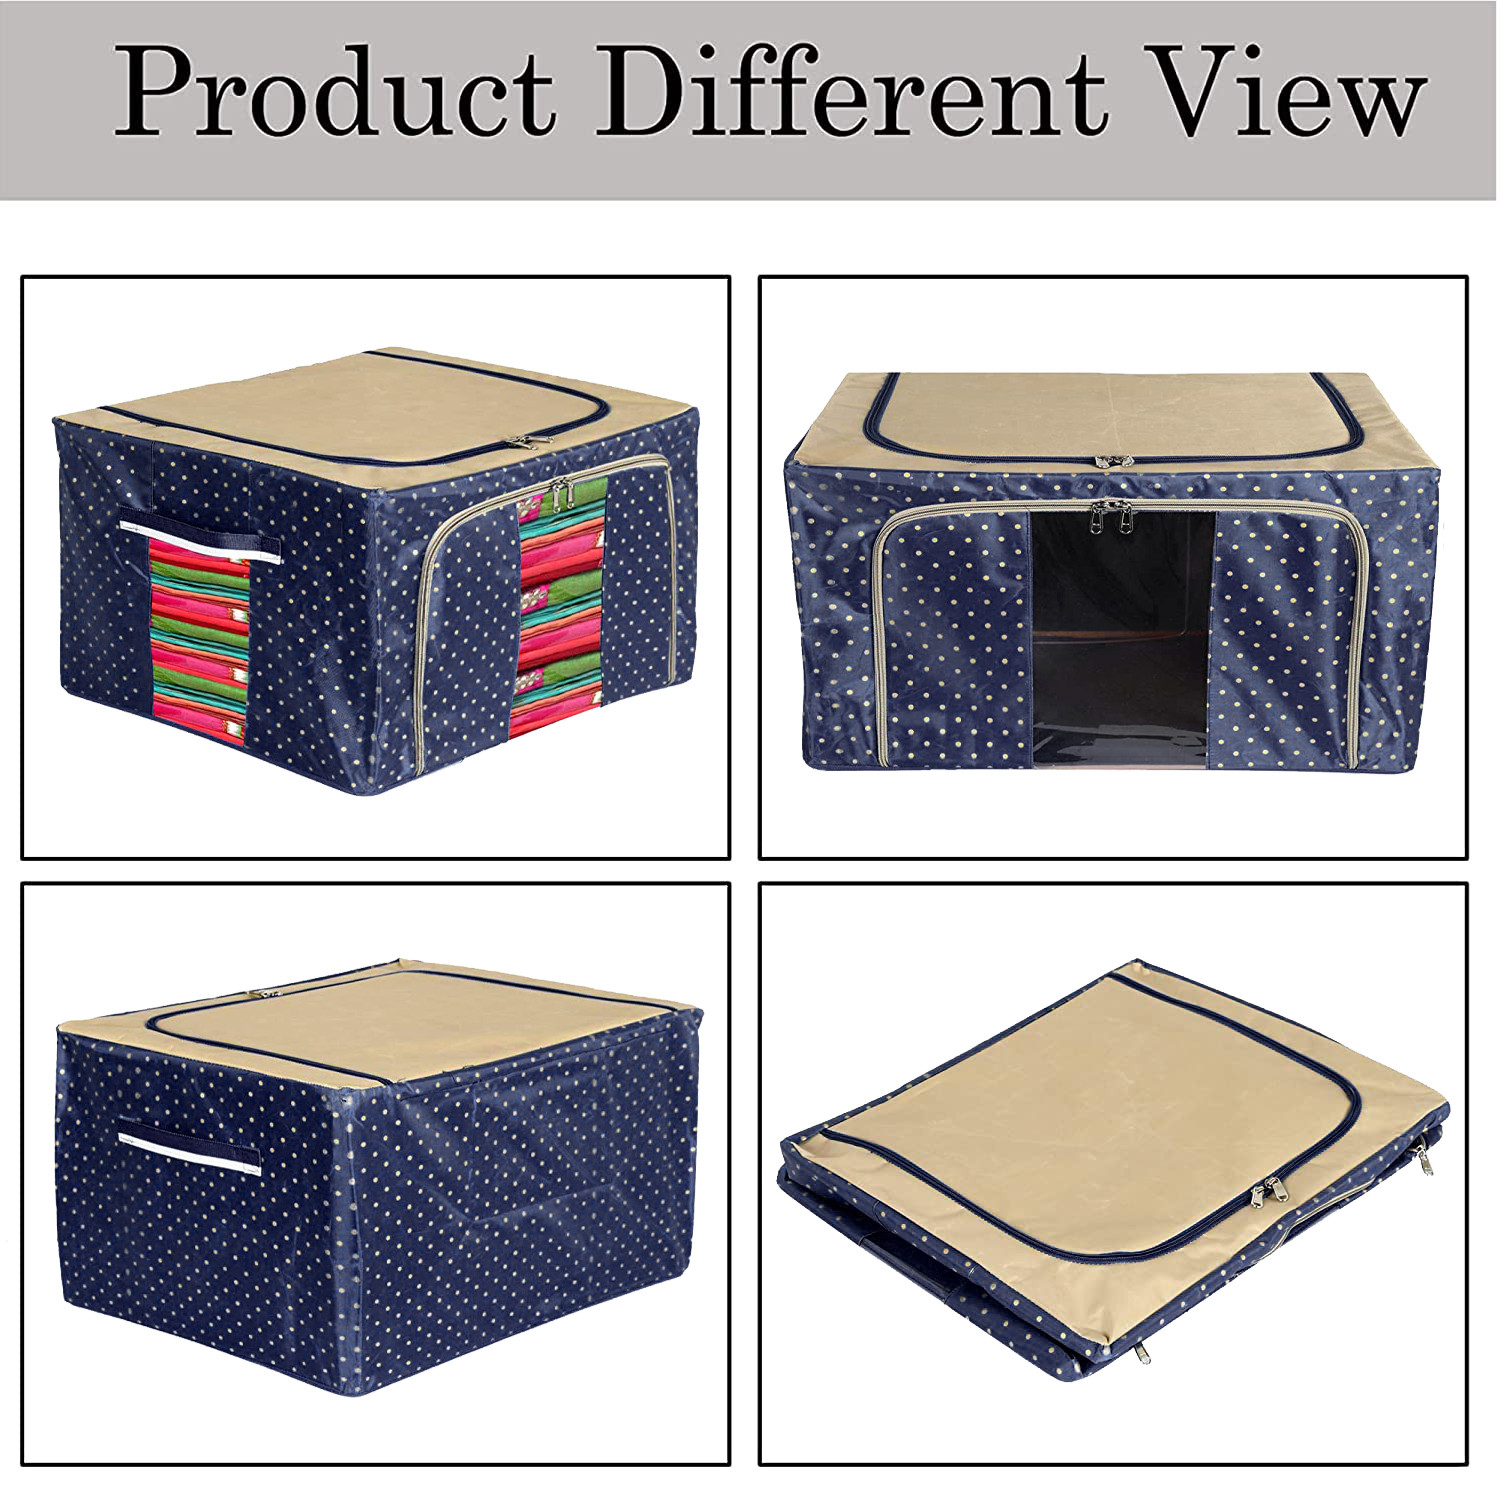 Kuber Industries Dot Printed Steel Frame Storage Box/Organizer For Clothing, Blankets, Bedding With Clear Window, 24Ltr. (Navy Blue & Brown)